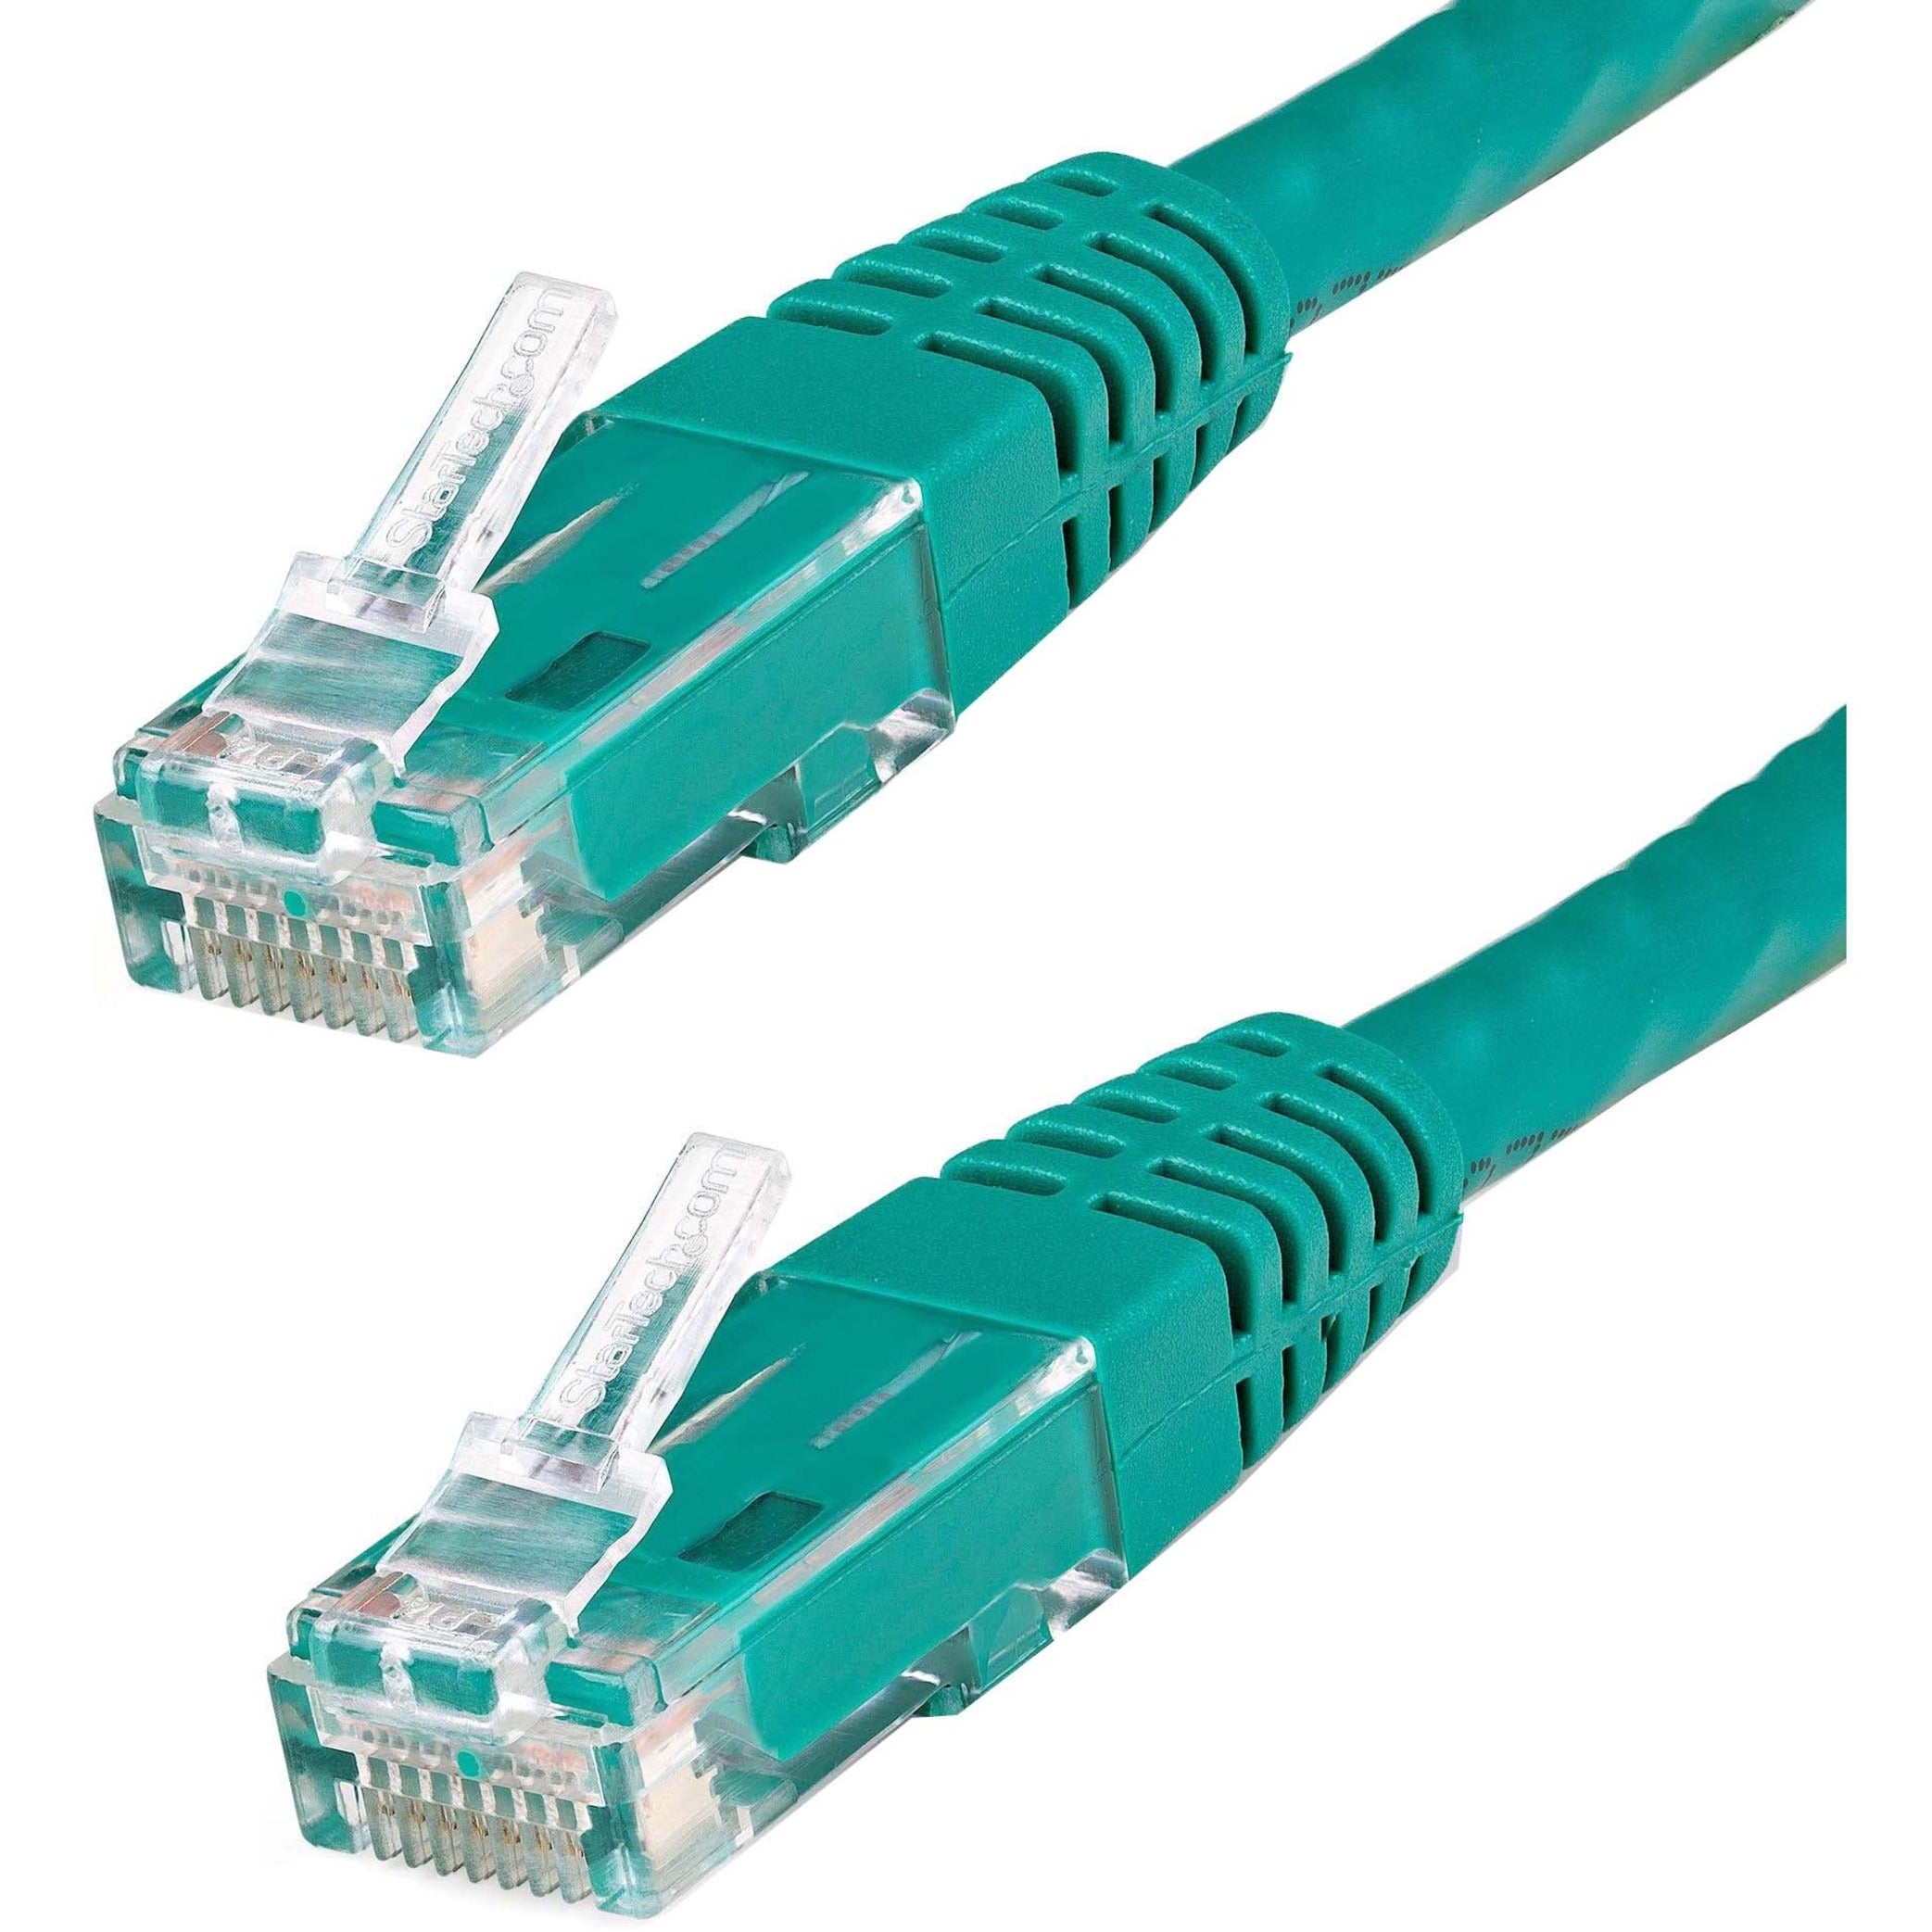 StarTech.com C6PATCH2GN 2ft Green Molded Cat6 UTP Patch Cable ETL Verified, 10 Gbit/s Data Transfer Rate, PoE++